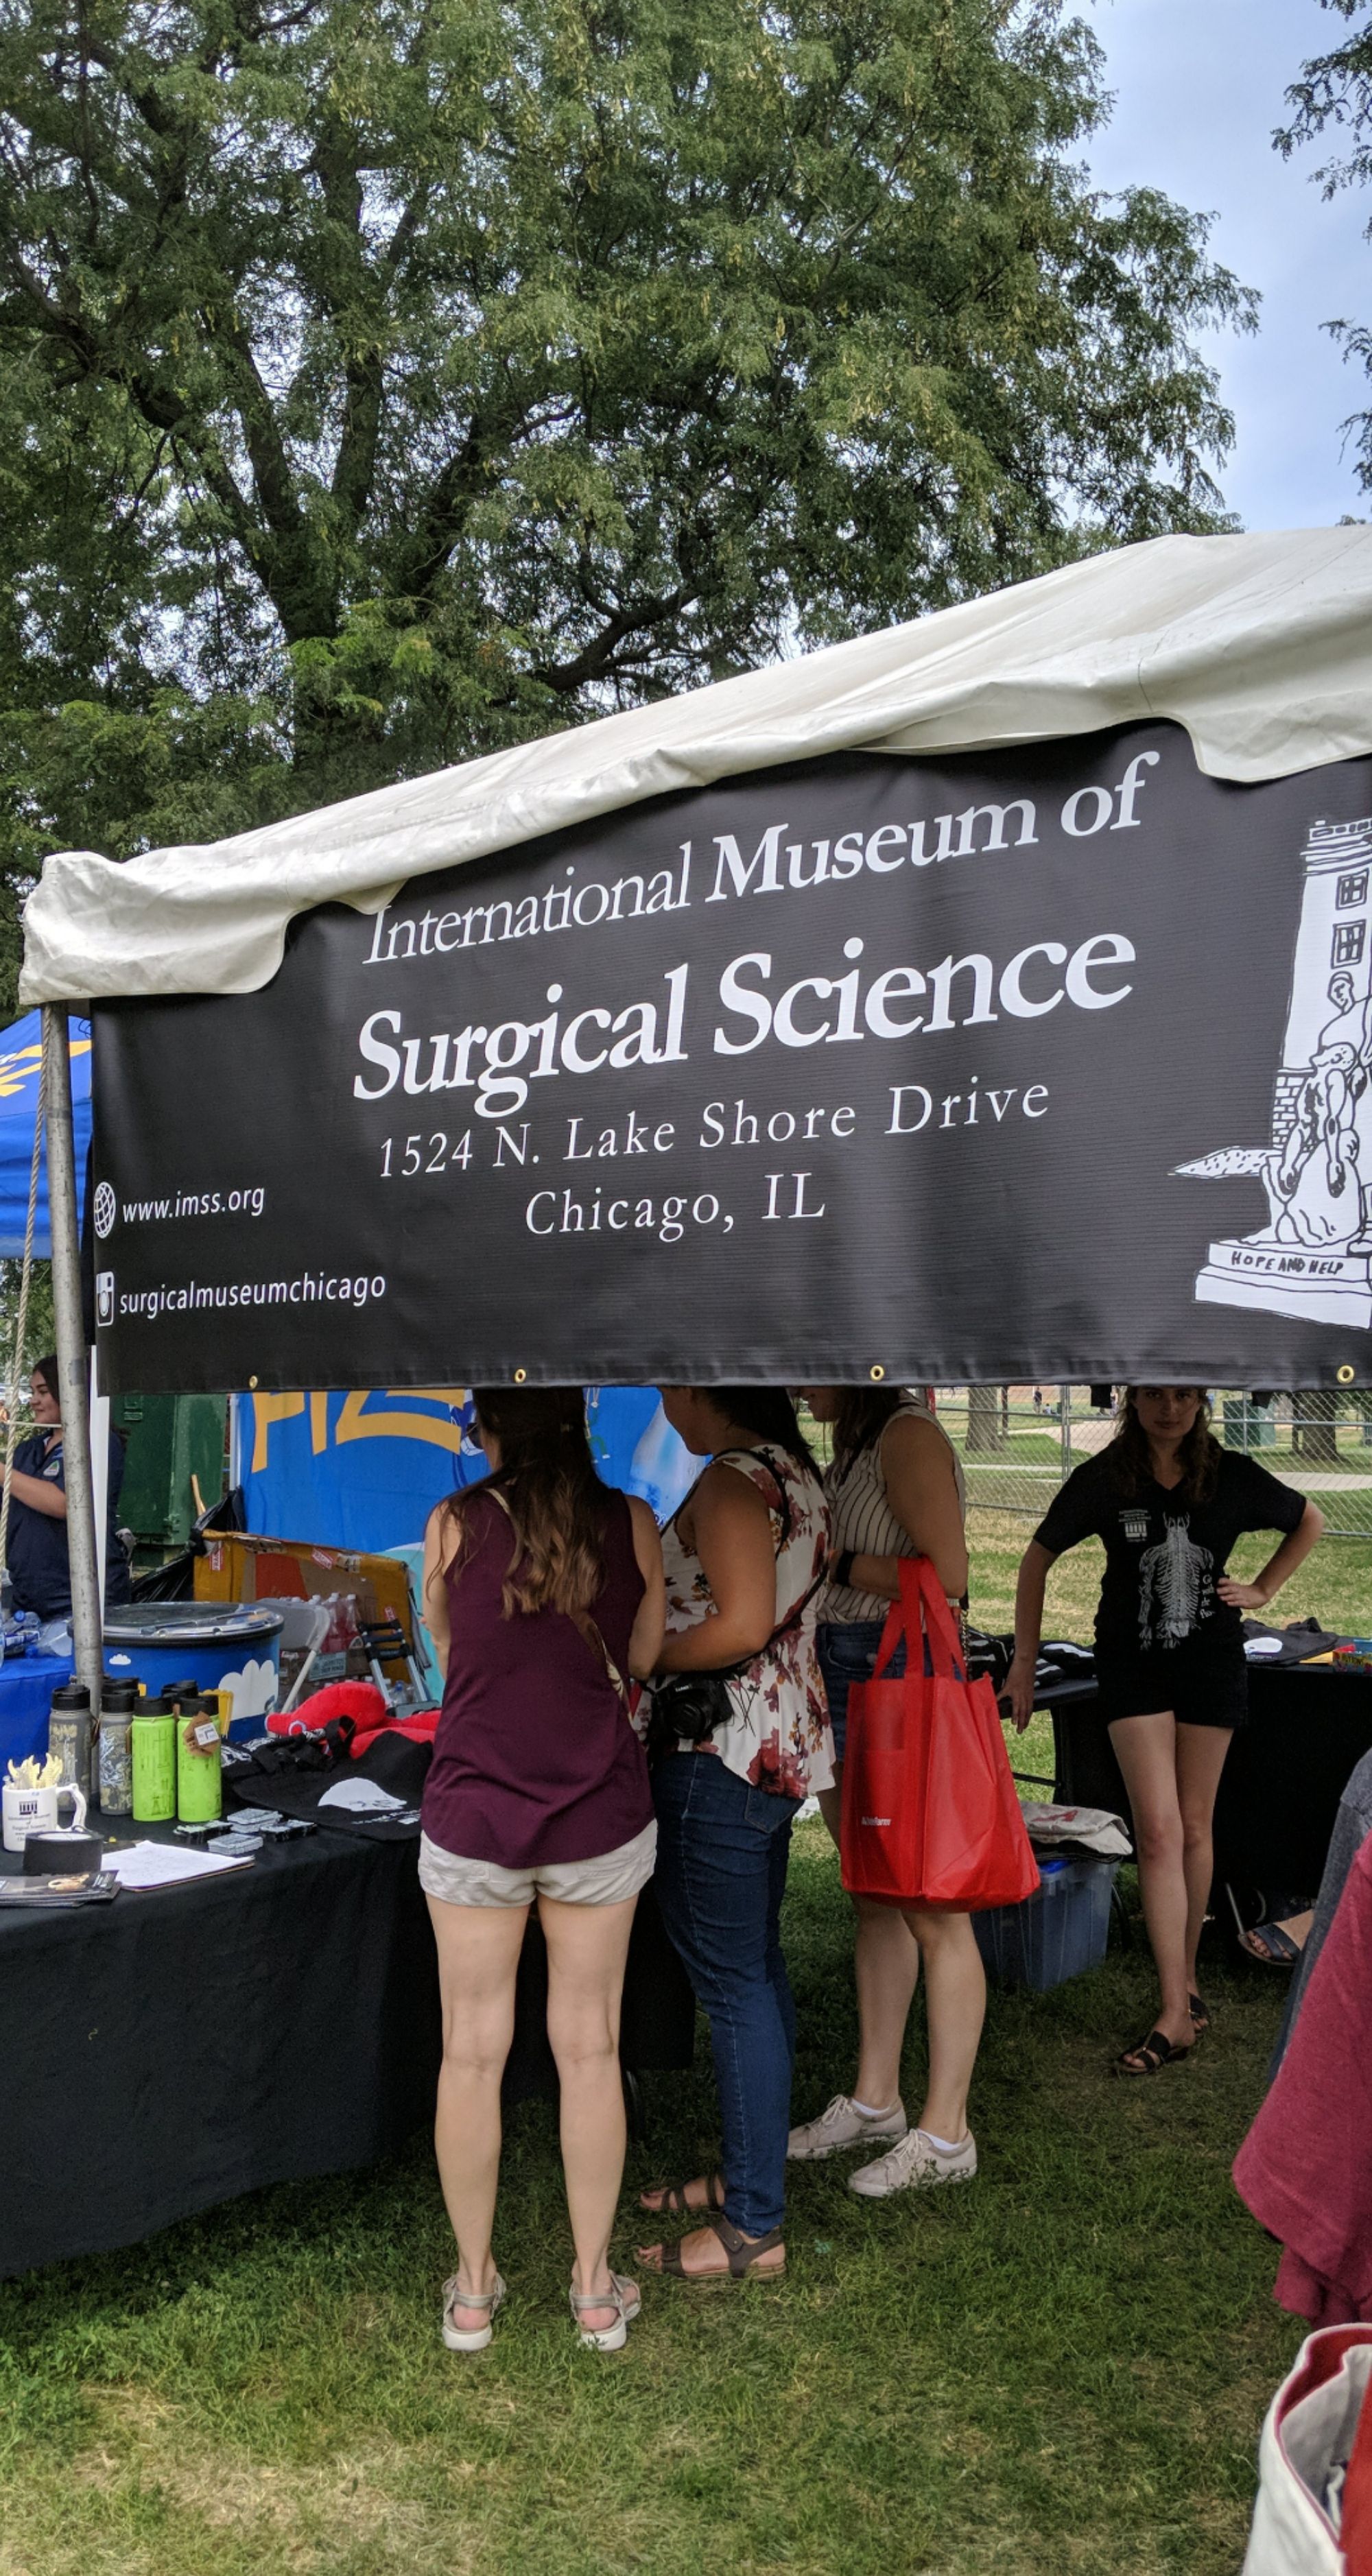 A tent with a banner reading “International Museum of Surgical Science” outdoors at the 2019 Chicago Hot Dog Fest. Visitors are looking at merchandise displayed on a table.
